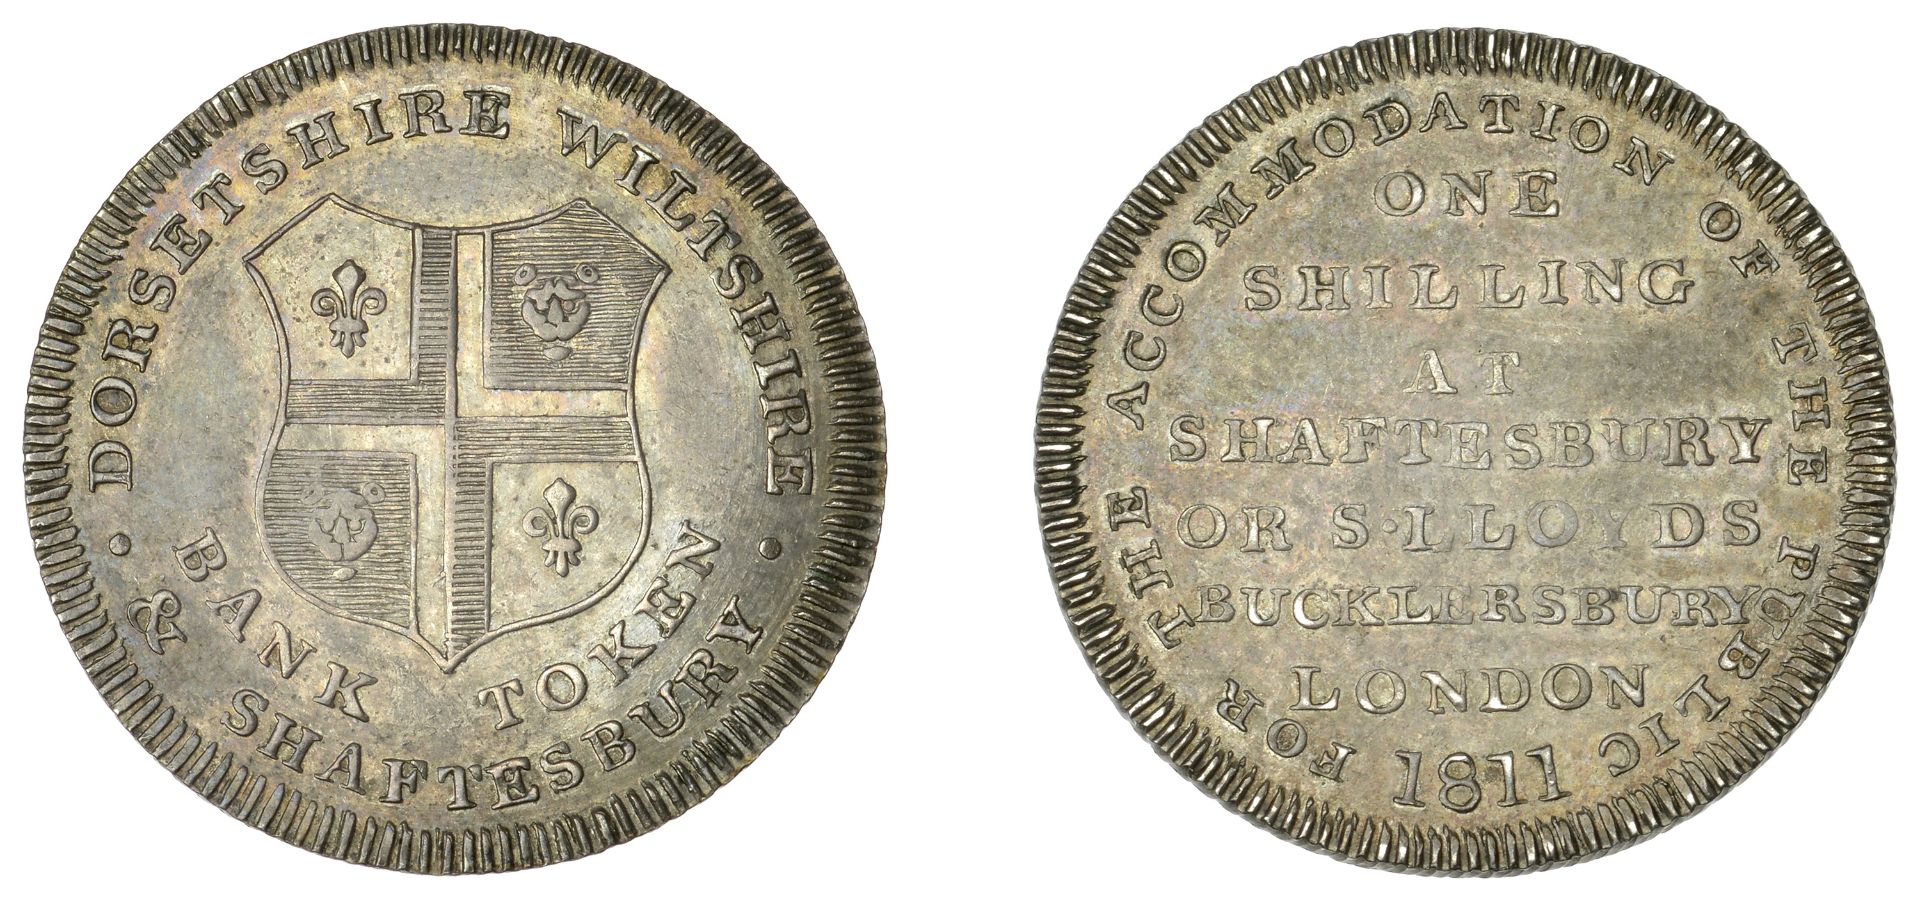 The Collection of 19th Century Tokens formed by John Akins (Part III: Final)